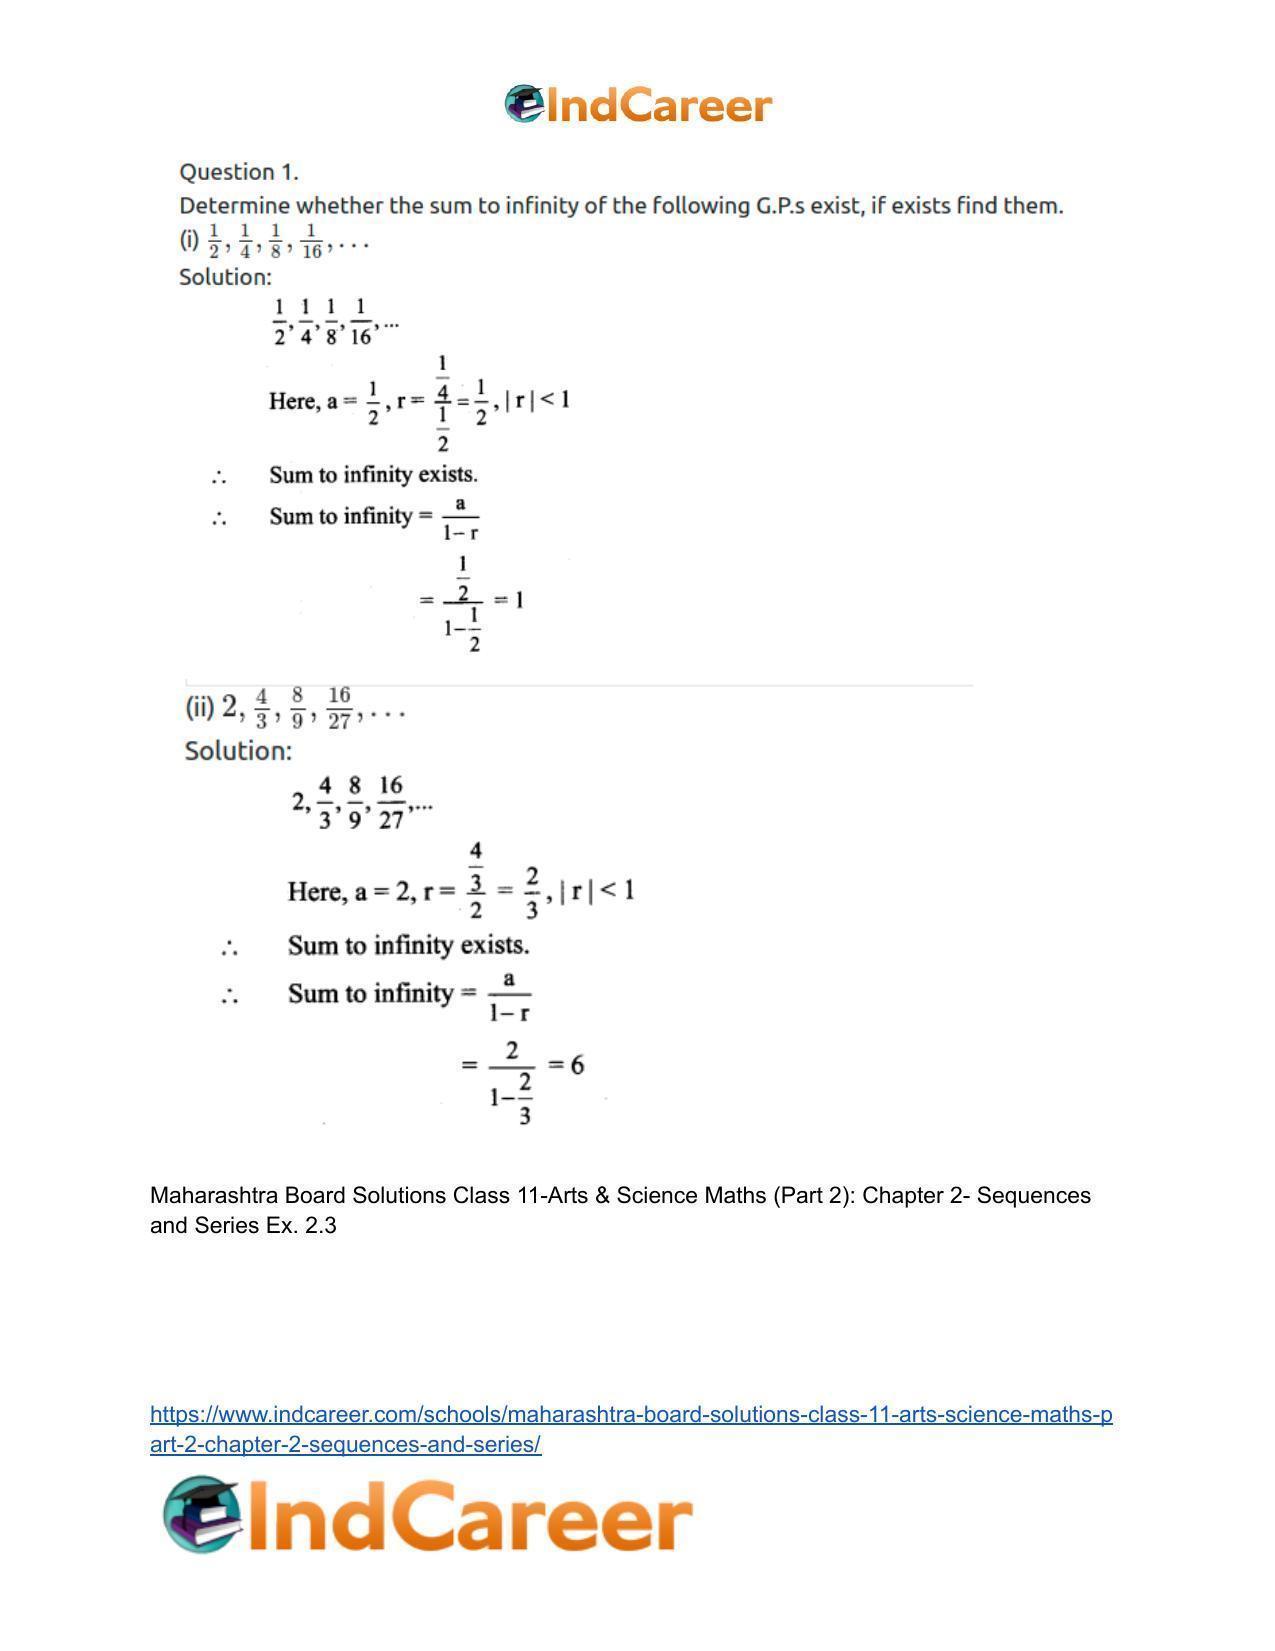 Maharashtra Board Solutions Class 11-Arts & Science Maths (Part 2): Chapter 2- Sequences and Series - Page 39